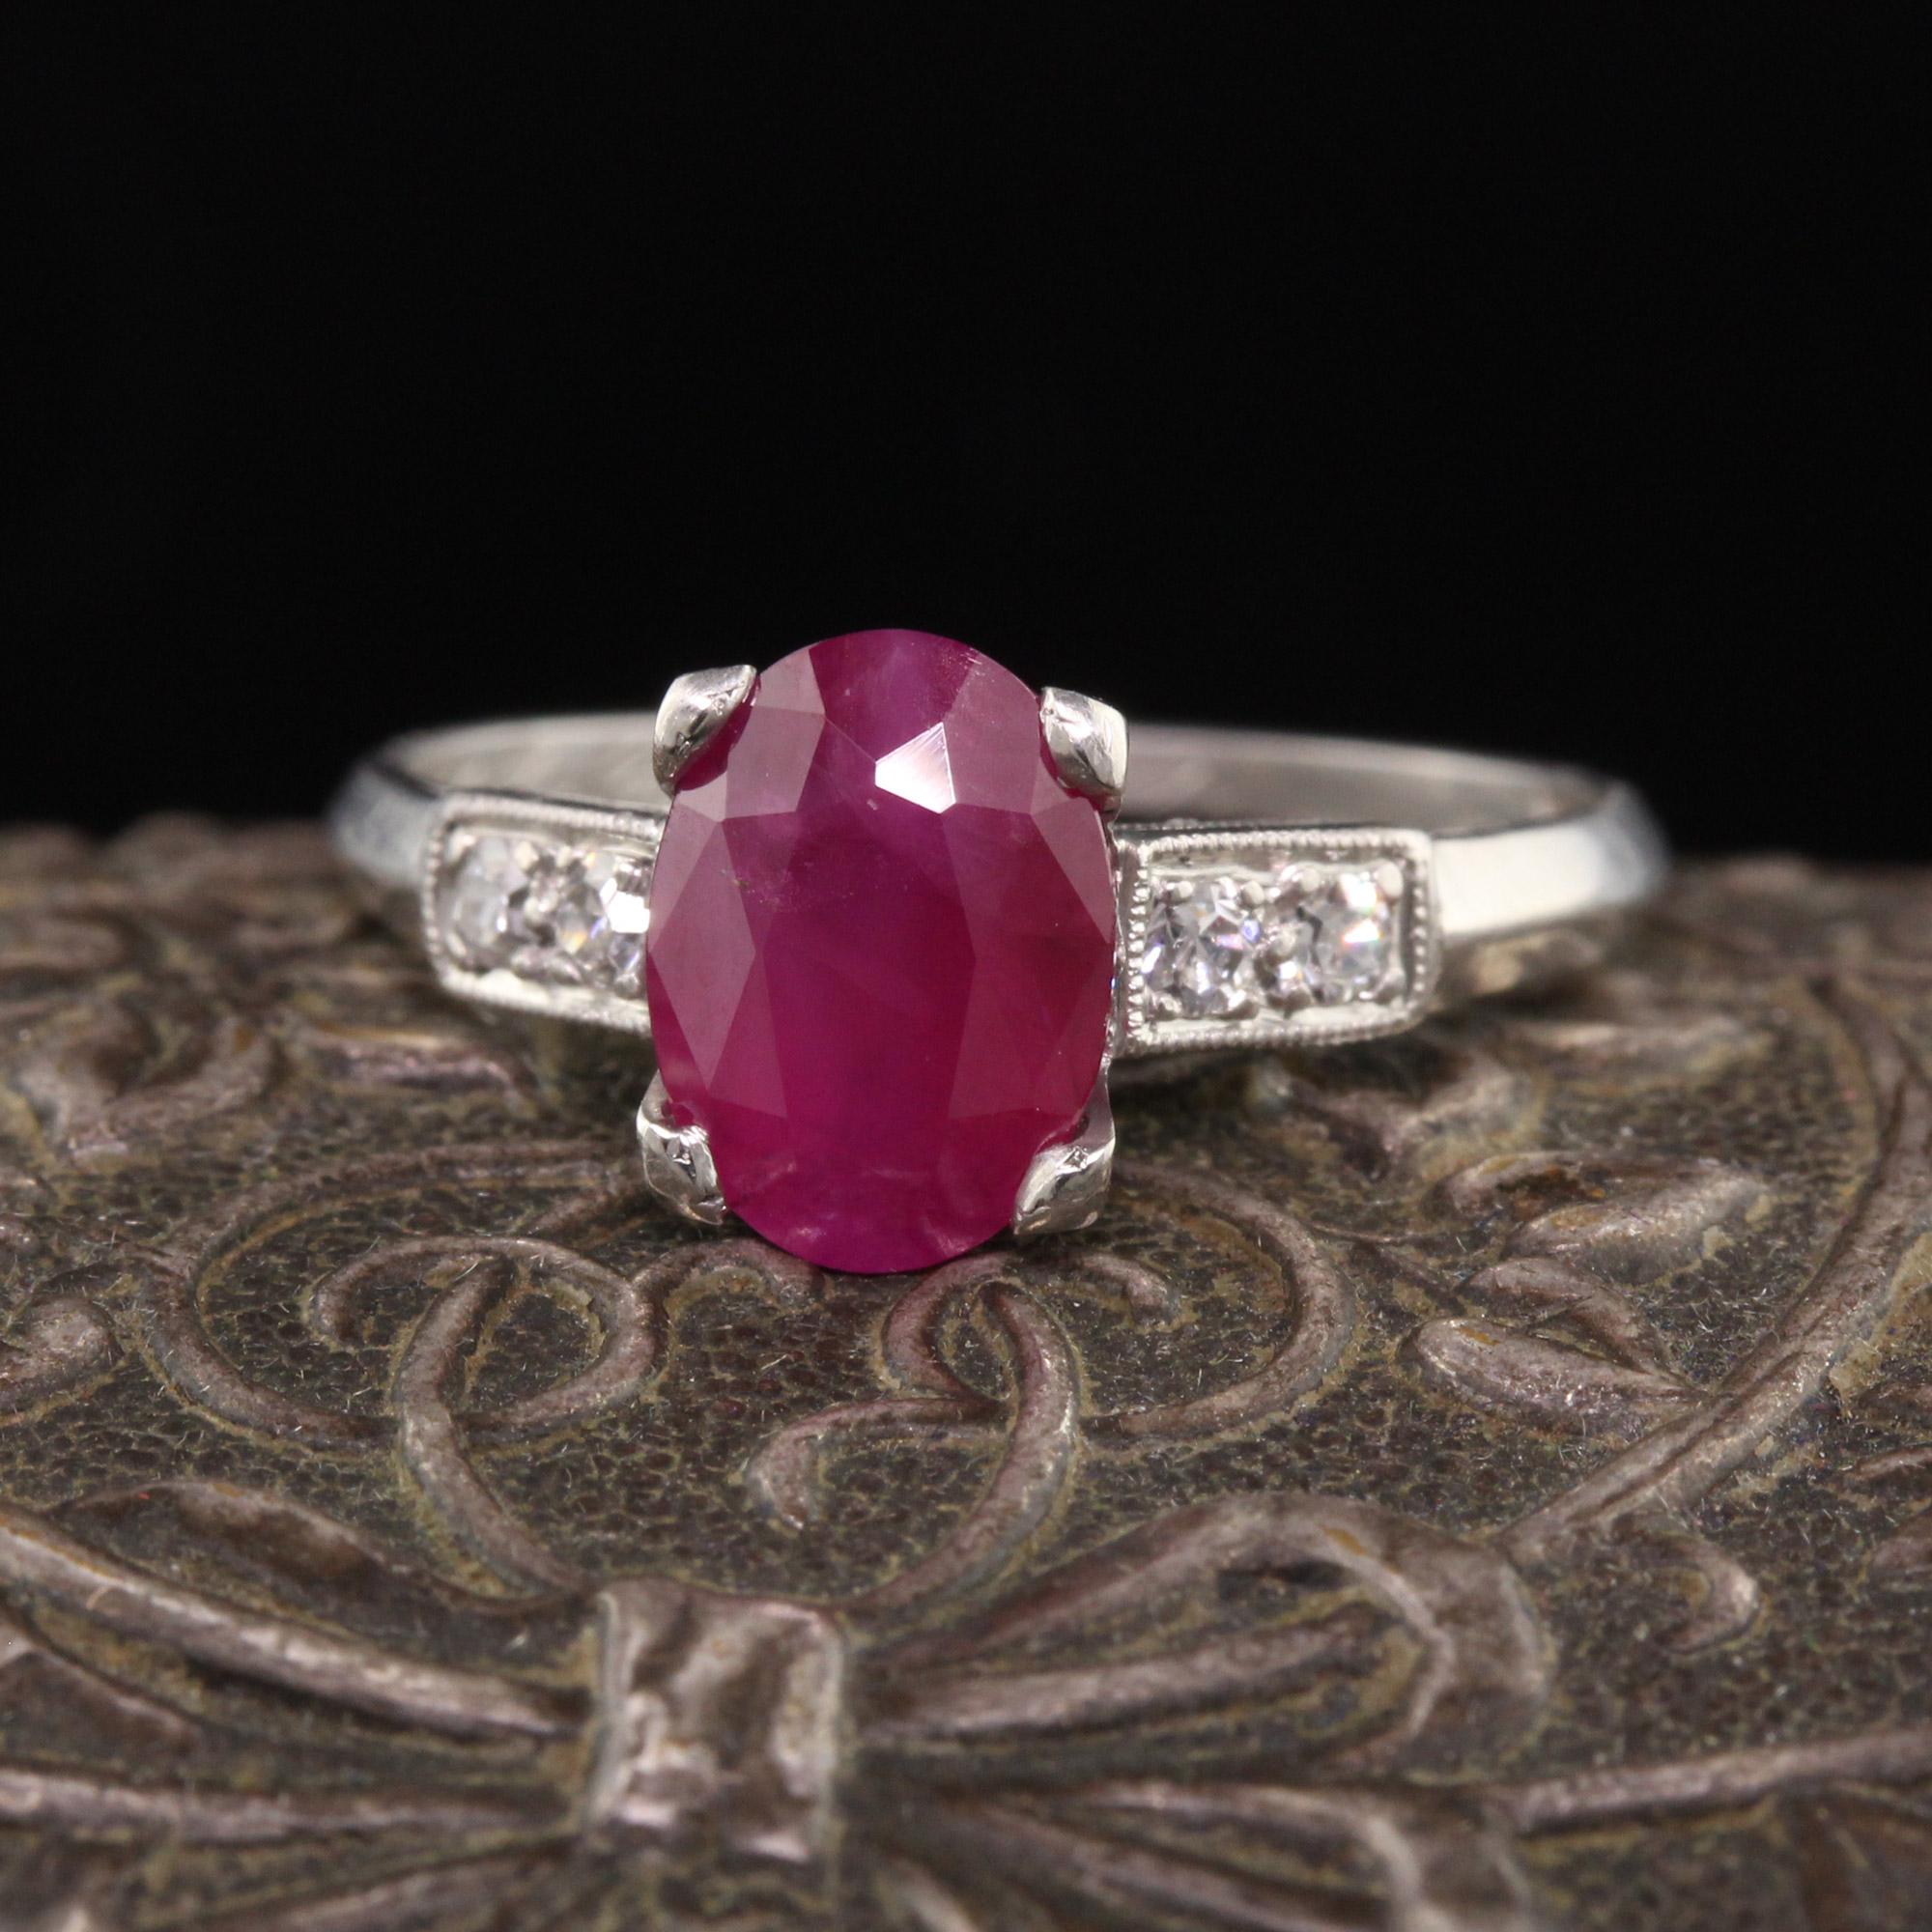 Beautiful Antique Art Deco Platinum Ruby and Diamond Engagement Ring. This beautiful engagement ring has a red ruby in the center of a beautiful art deco mounting. It's stunning!

Item #R1098

Metal: Platinum

Weight: 2.7 Grams

Size: 5

Diamond: